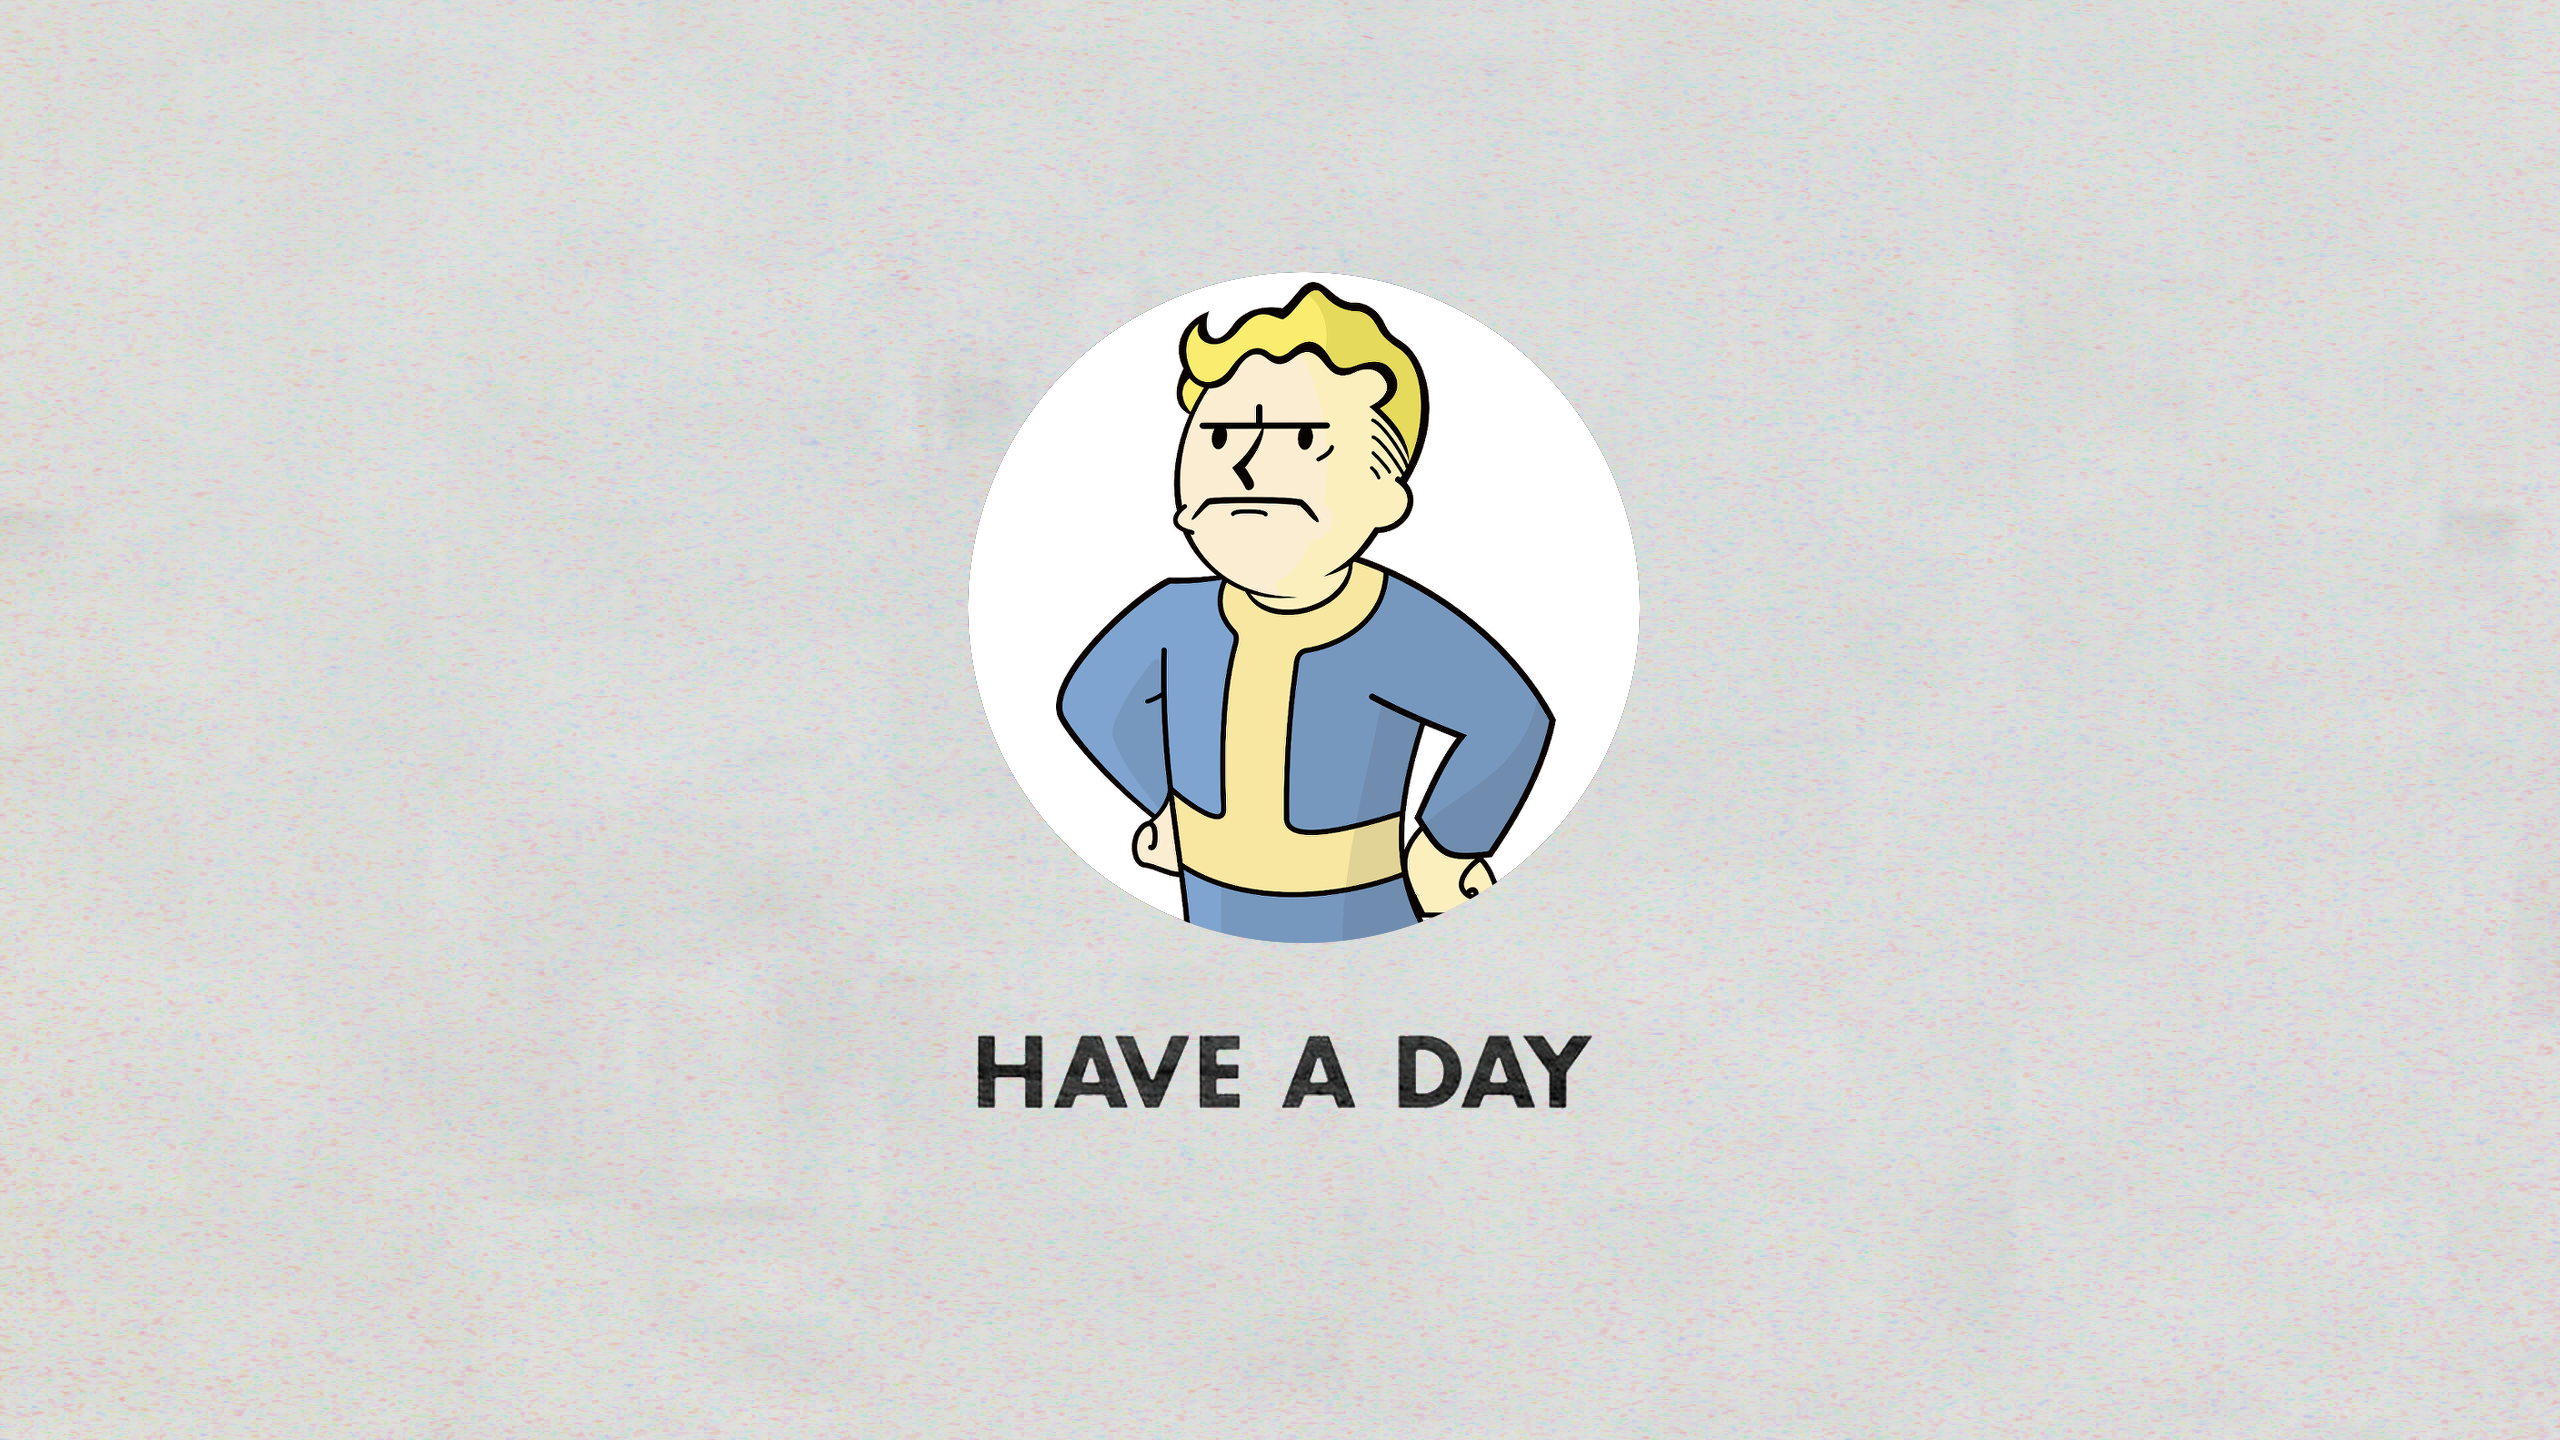 General 2560x1440 video games Pip-Boy Fallout PC gaming minimalism simple background typography